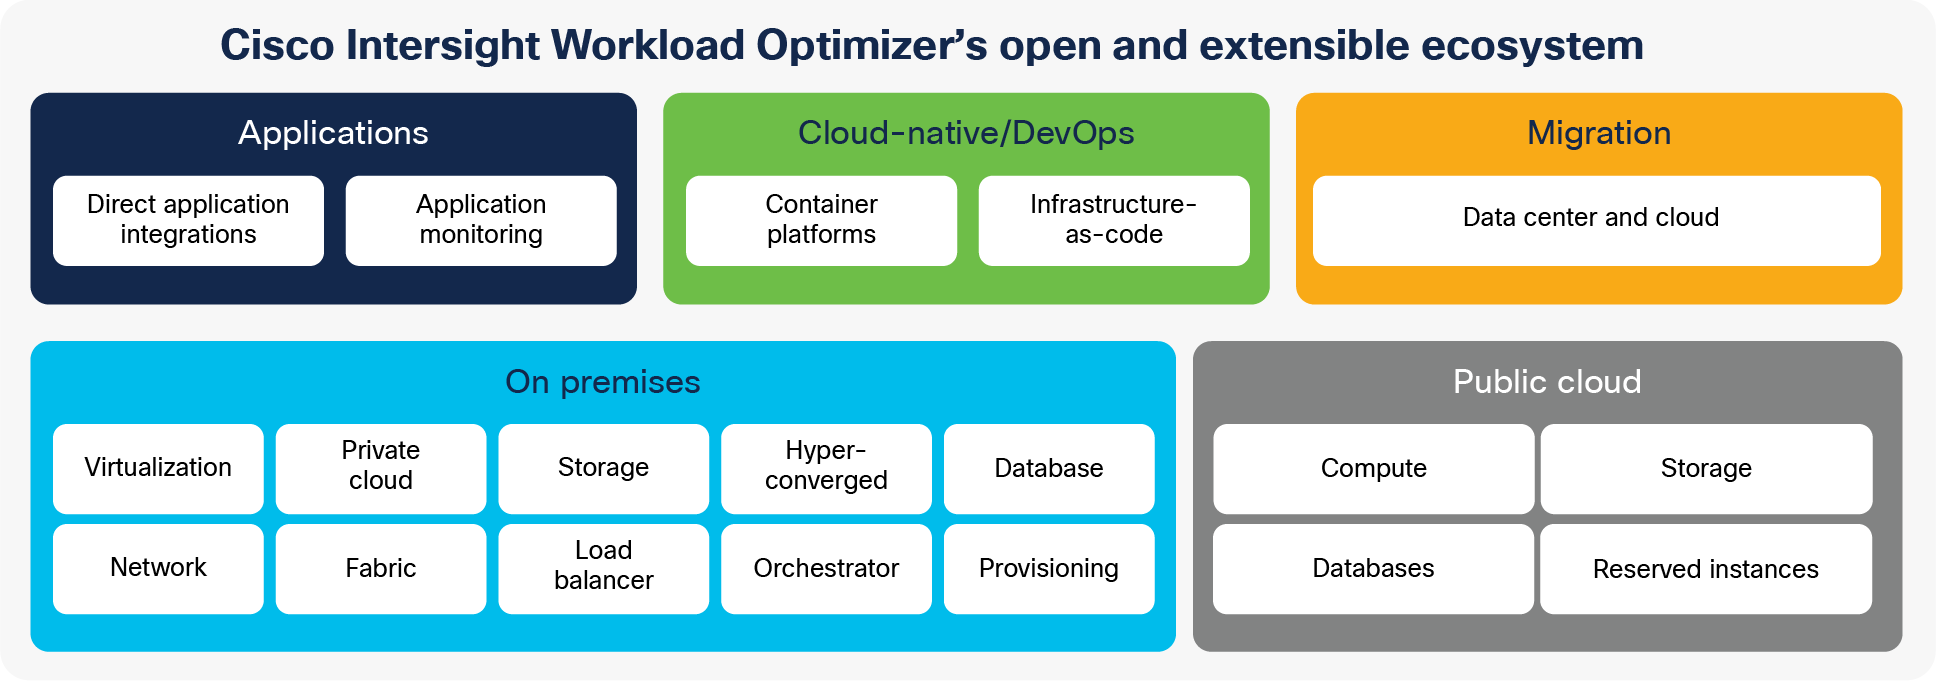 Cisco Intersight Workload Optimizer analyzes telemetry data across your hybrid cloud environment to optimize resources and reduce cost